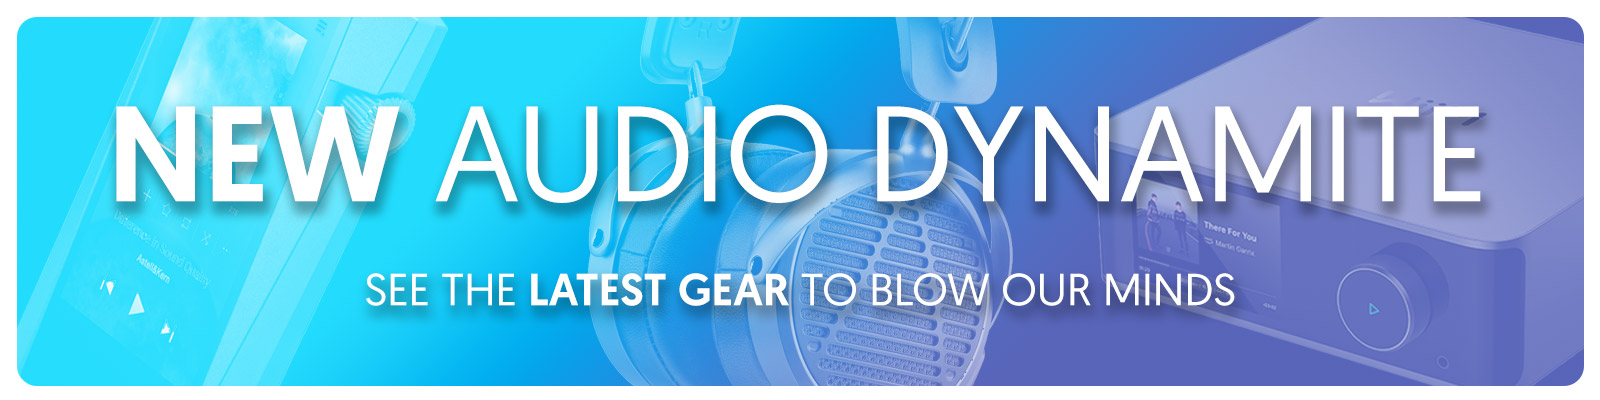 New Audio Dynamite | Get the latest audio gear at Audio Sanctuary